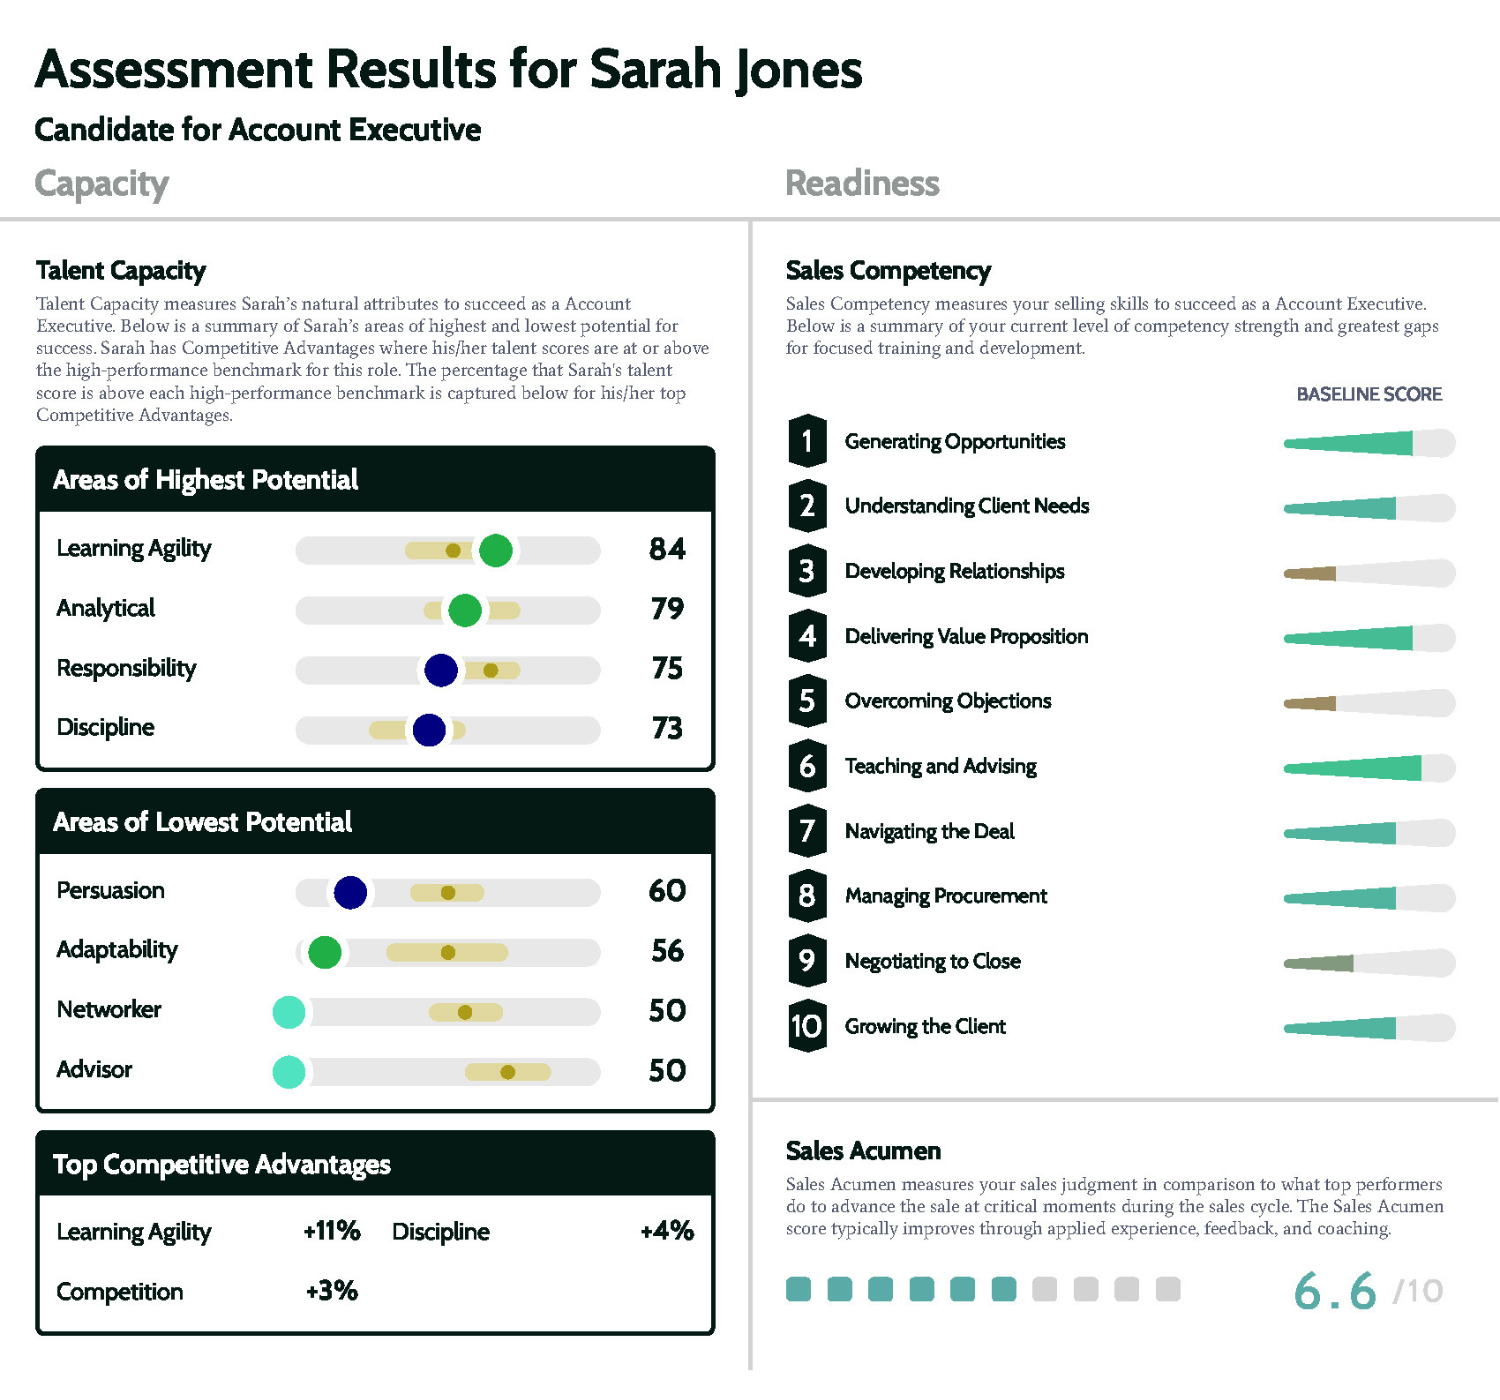 Assessment Results Graphic